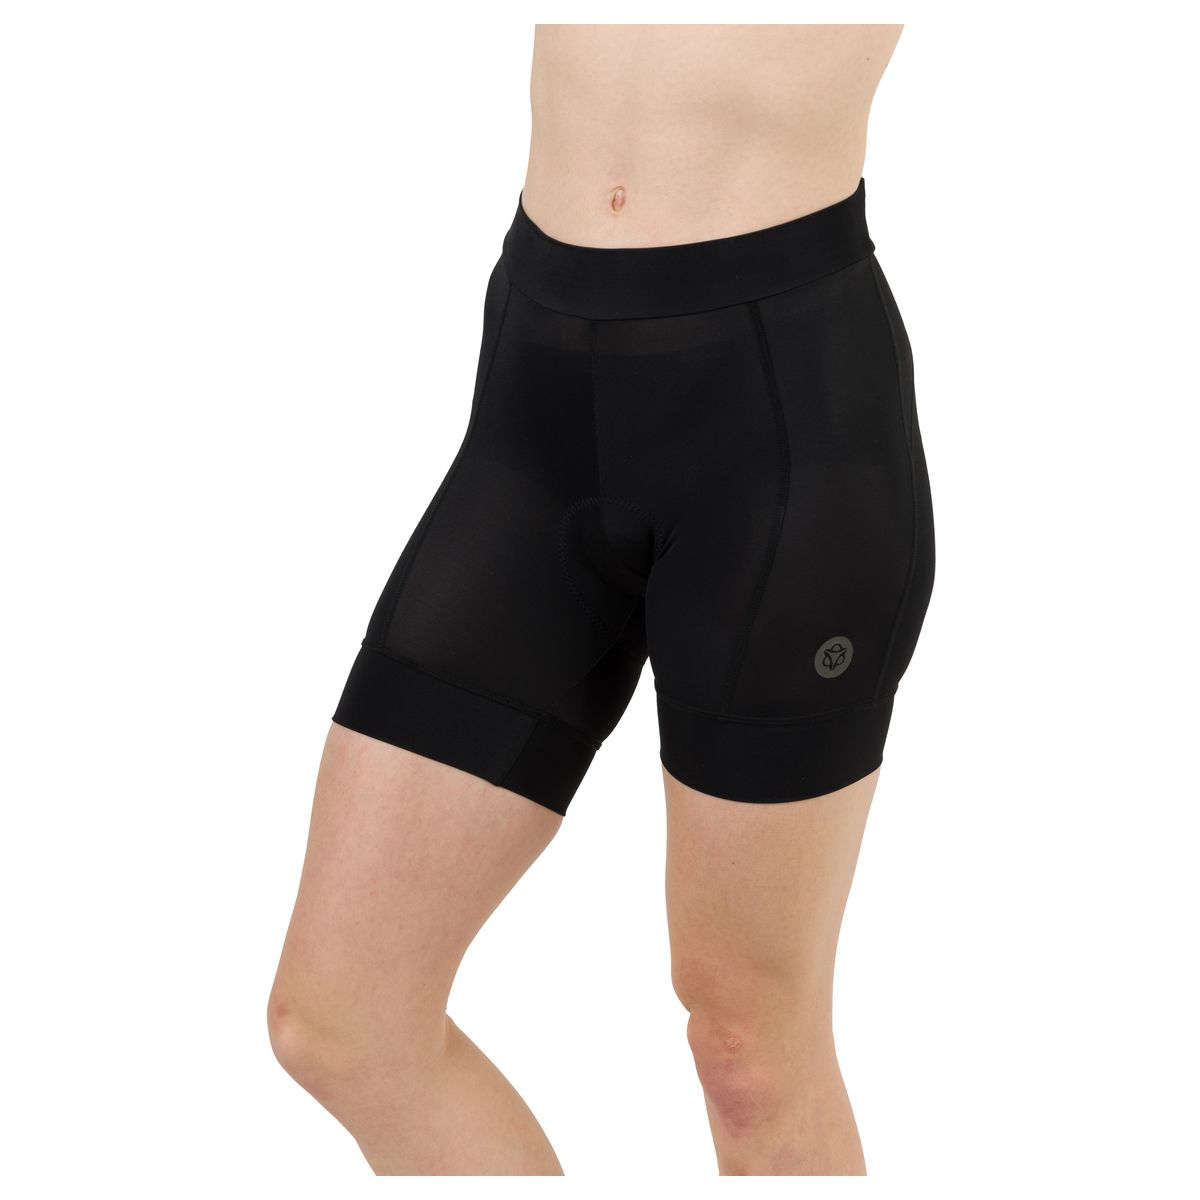 Shorty II Essential Women fit example